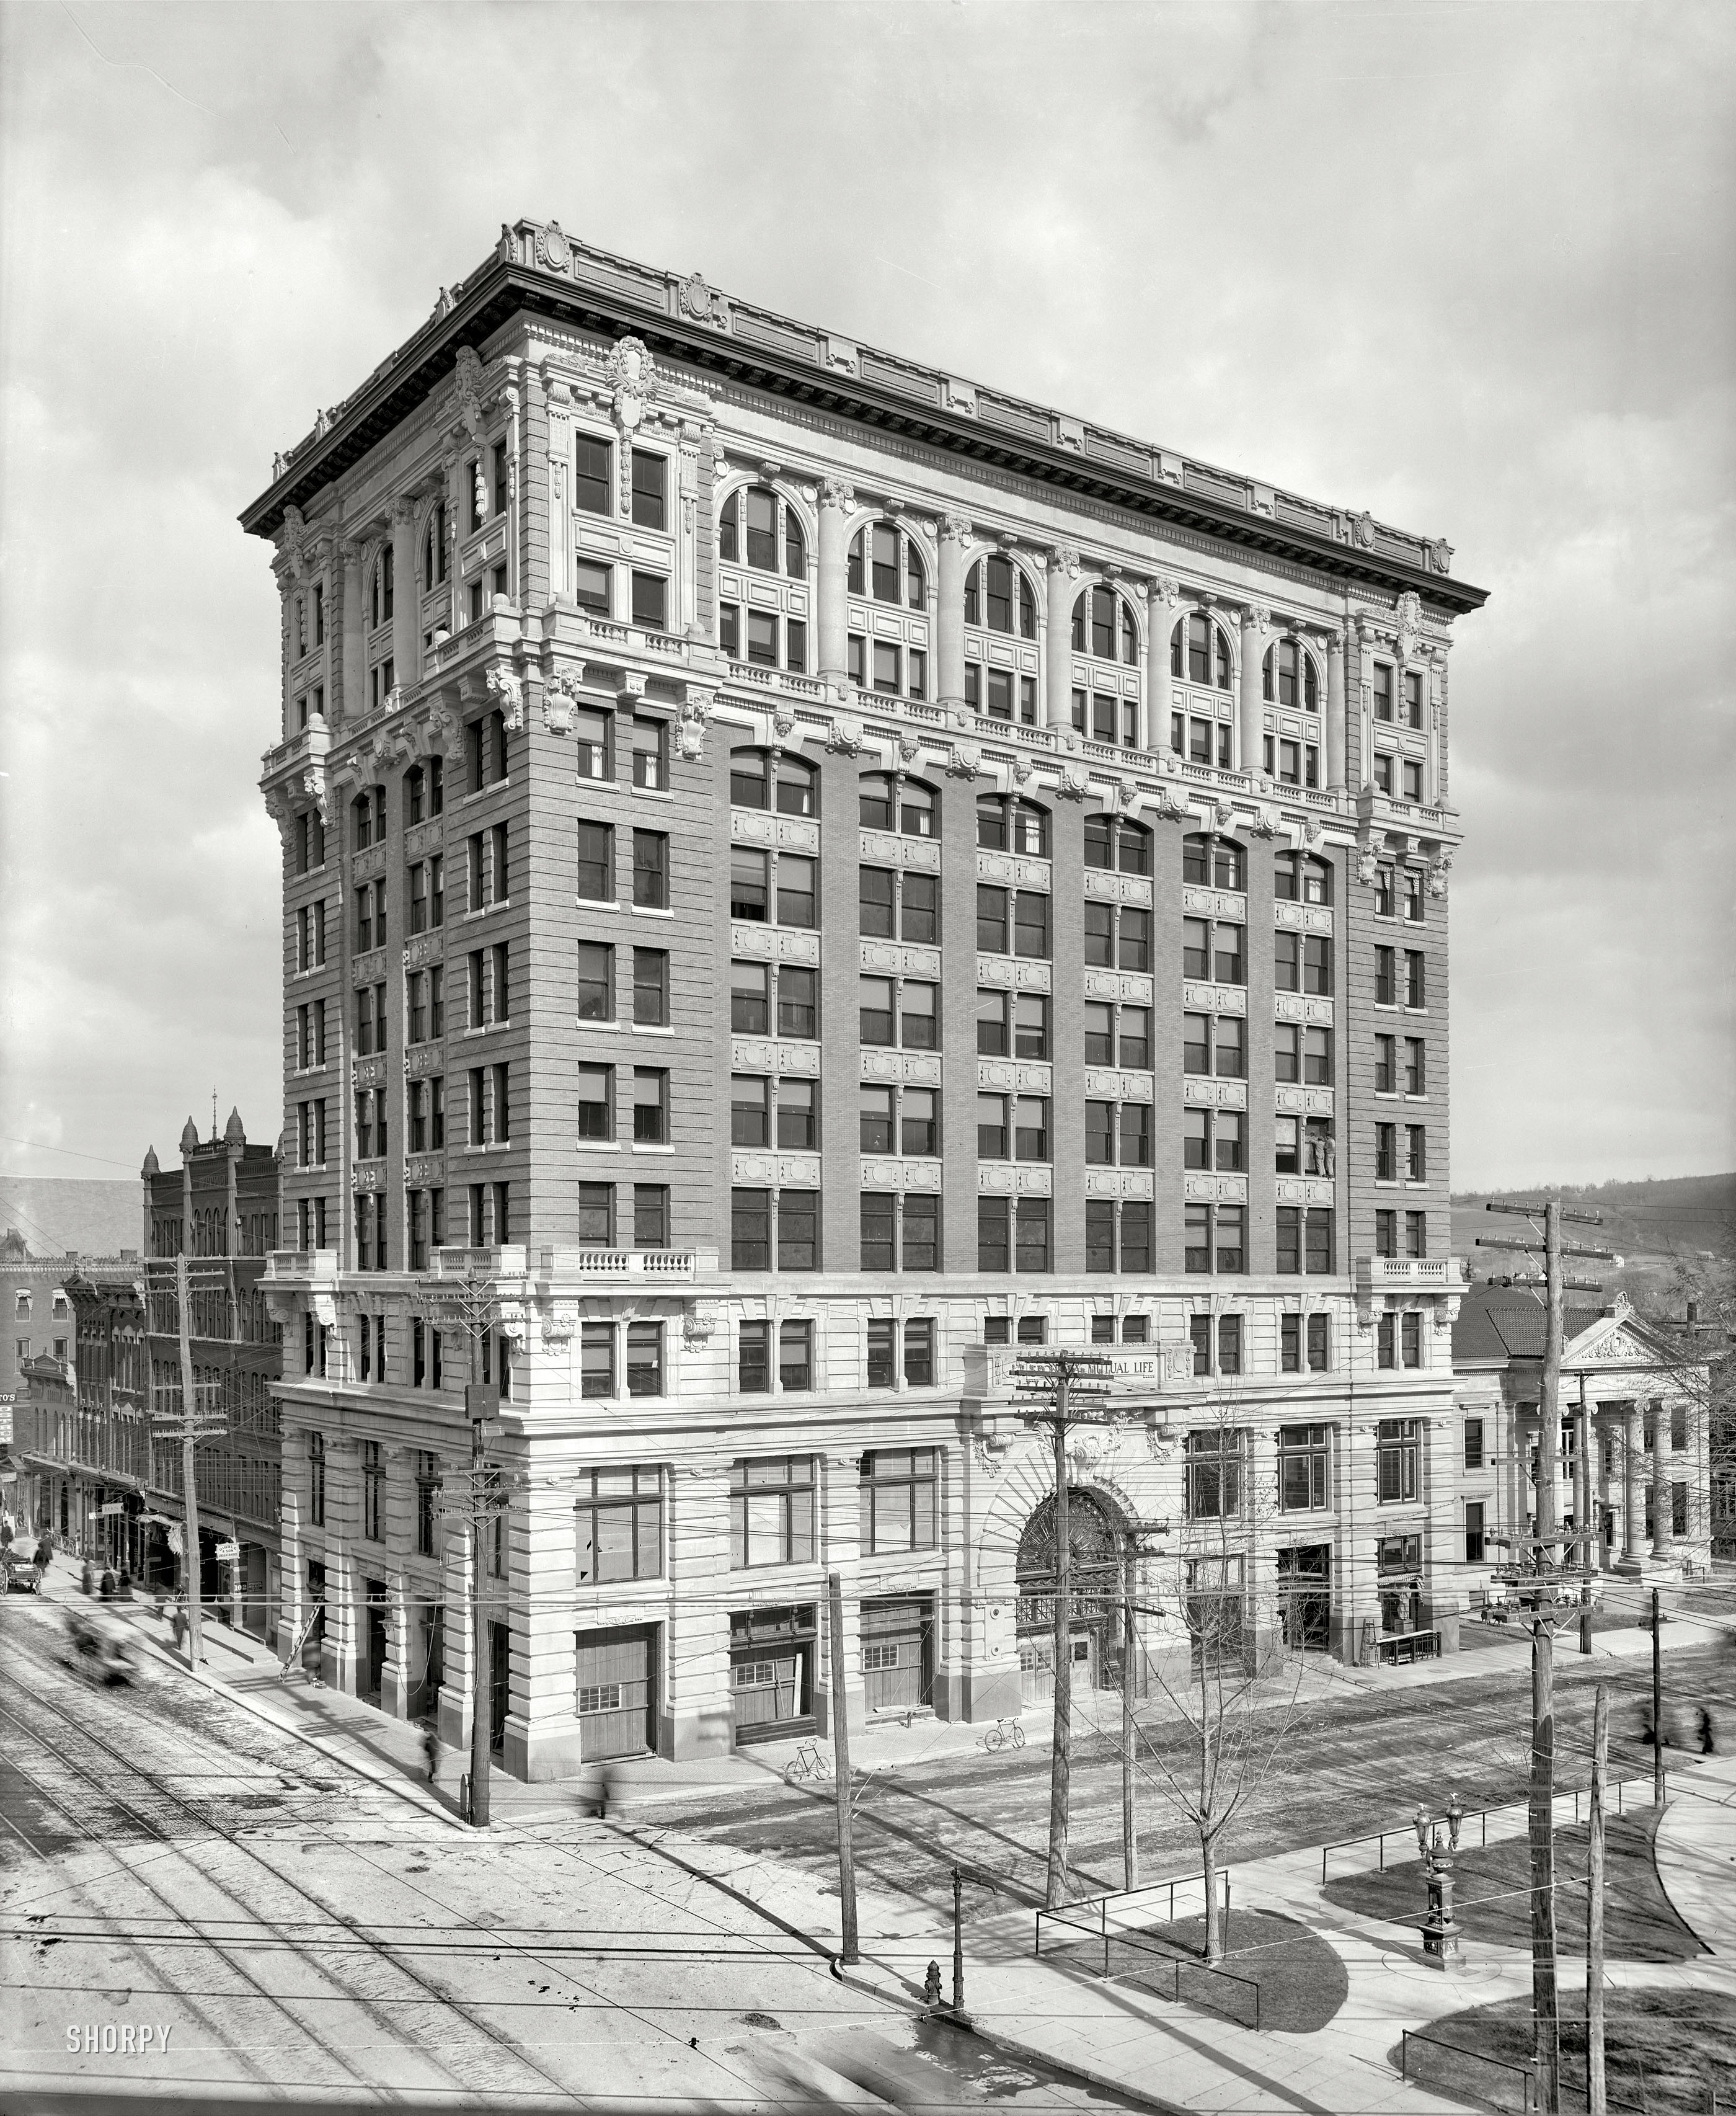 Binghamton, New York, circa 1905. "Security Mutual Life Insurance building." Rising amid a web of wires. Detroit Publishing glass negative. View full size.